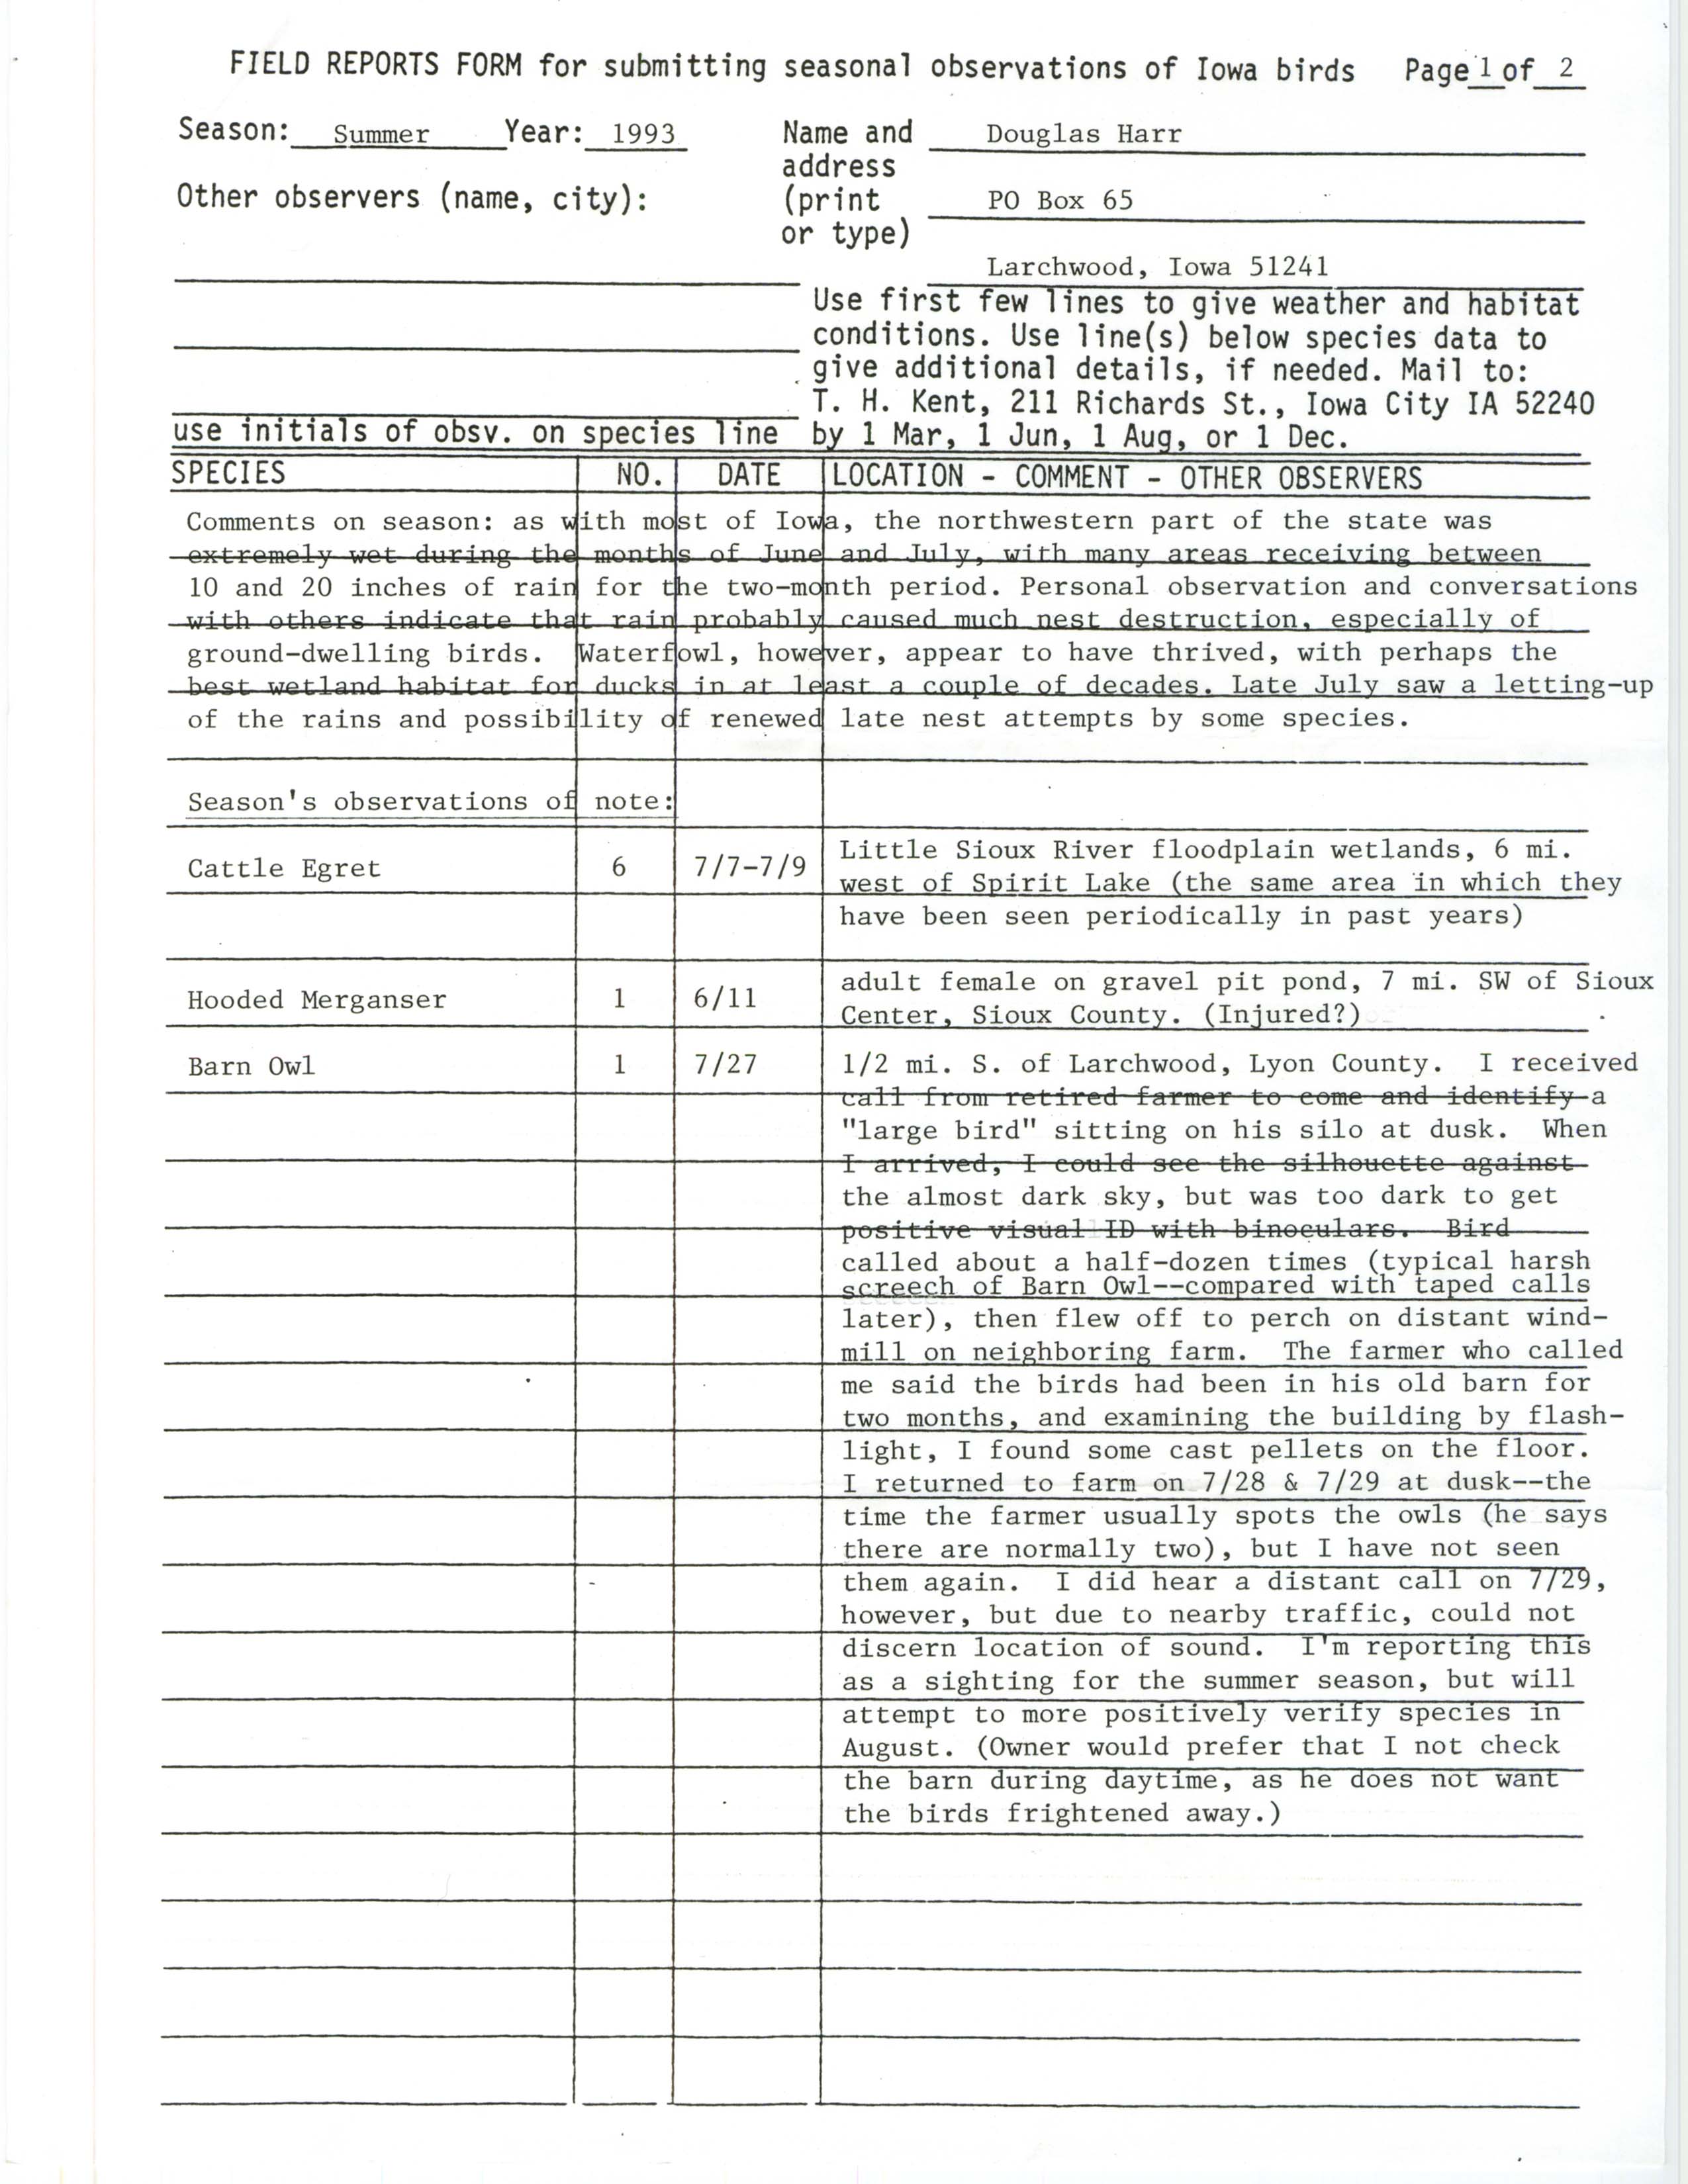 Field reports form for submitting seasonal observations of Iowa birds, Douglas C. Harr, summer 1993